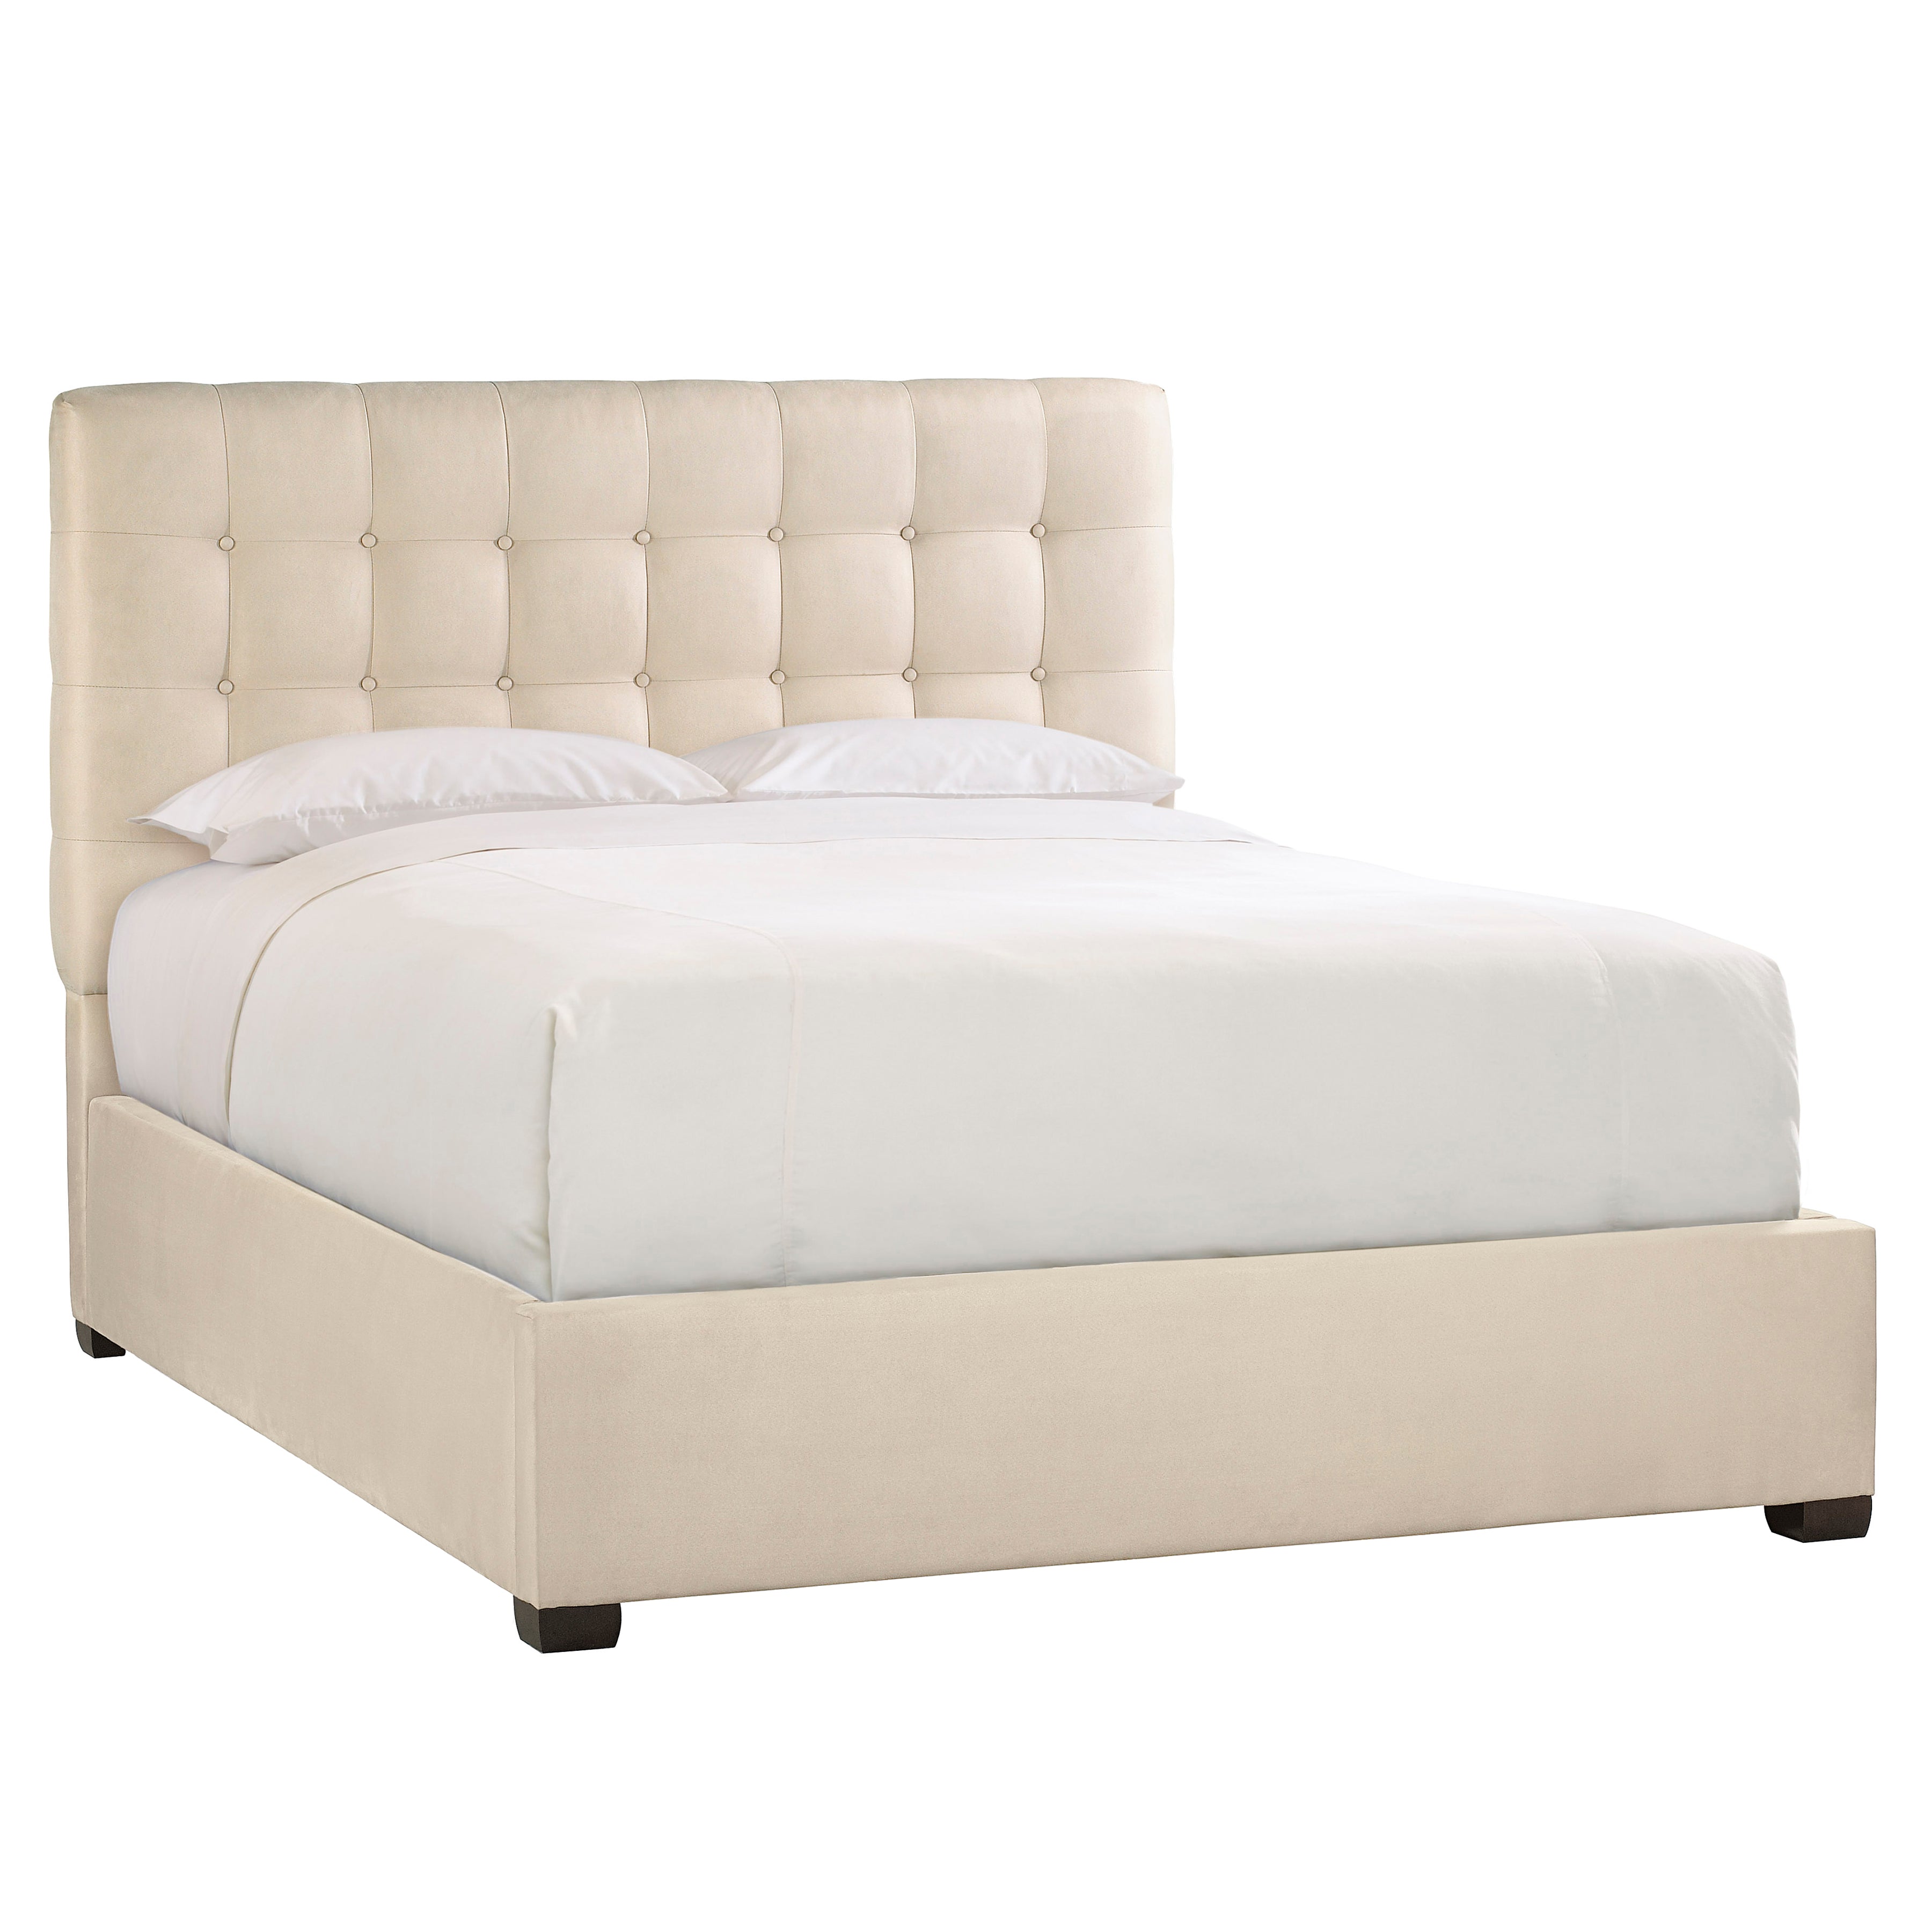 Avery Upholstered King Panel Bed in Cream